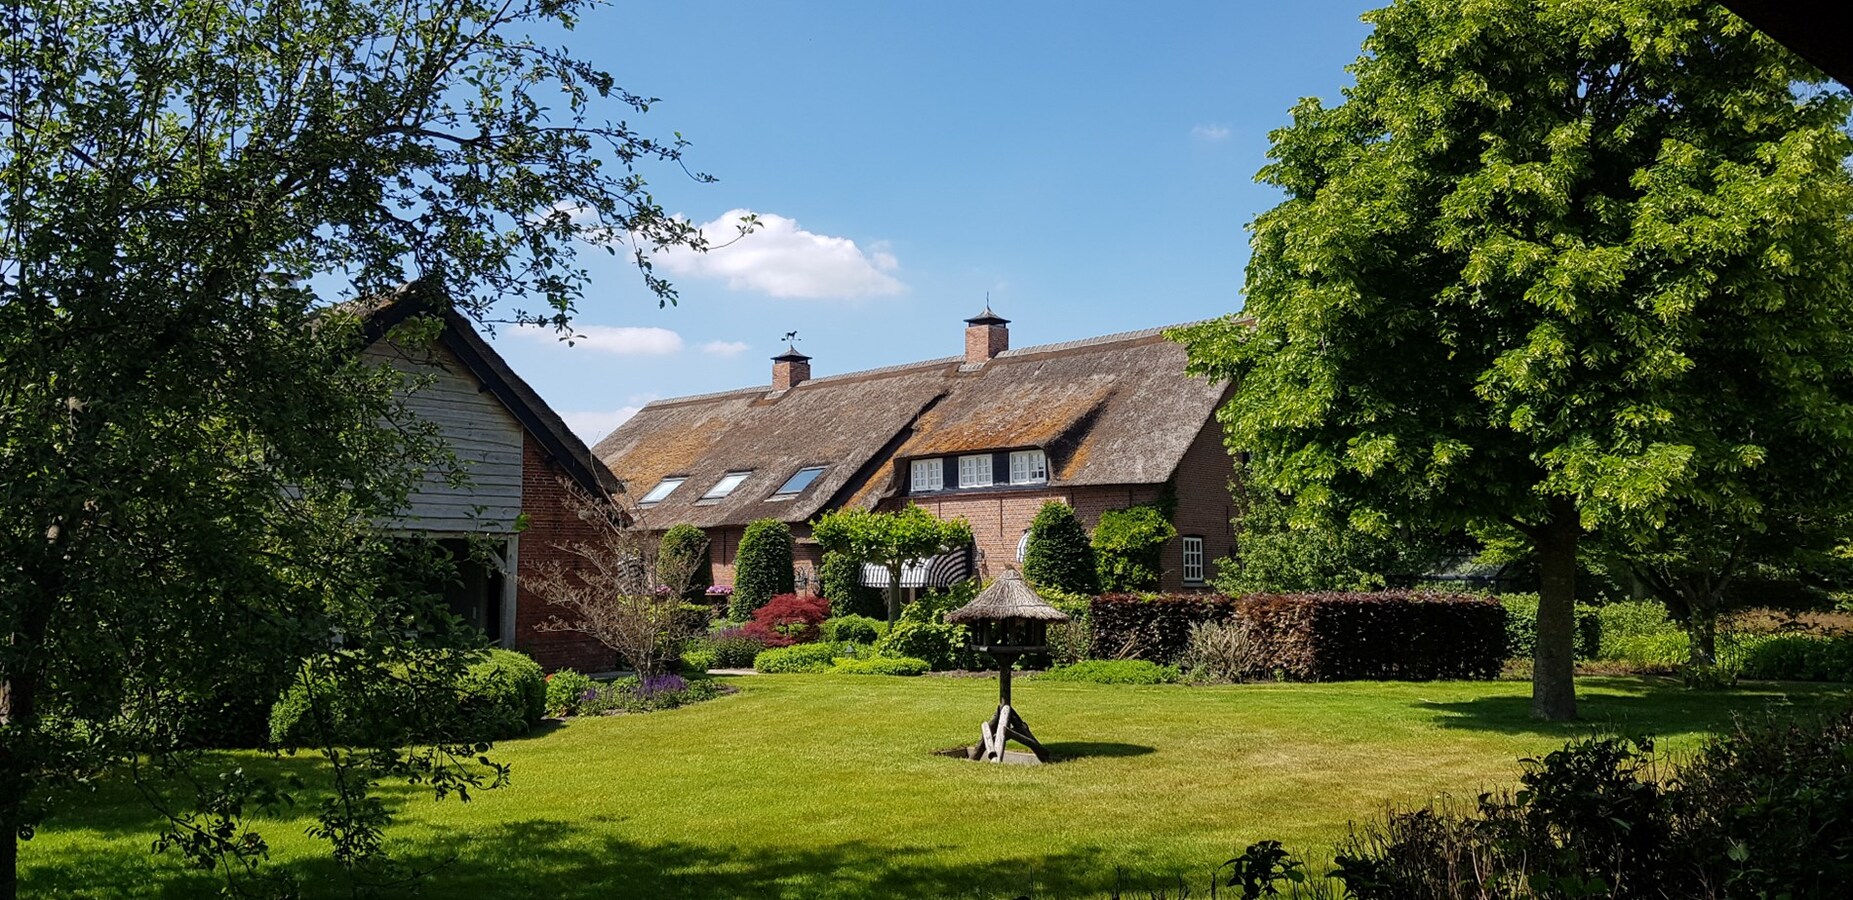 Luxurious country house with equestrian facilities on approximately 3.8 hectares (option to purchase adjacent meadows of approximately 4 hectares and a meadow of approximately 1.7 hectares) 